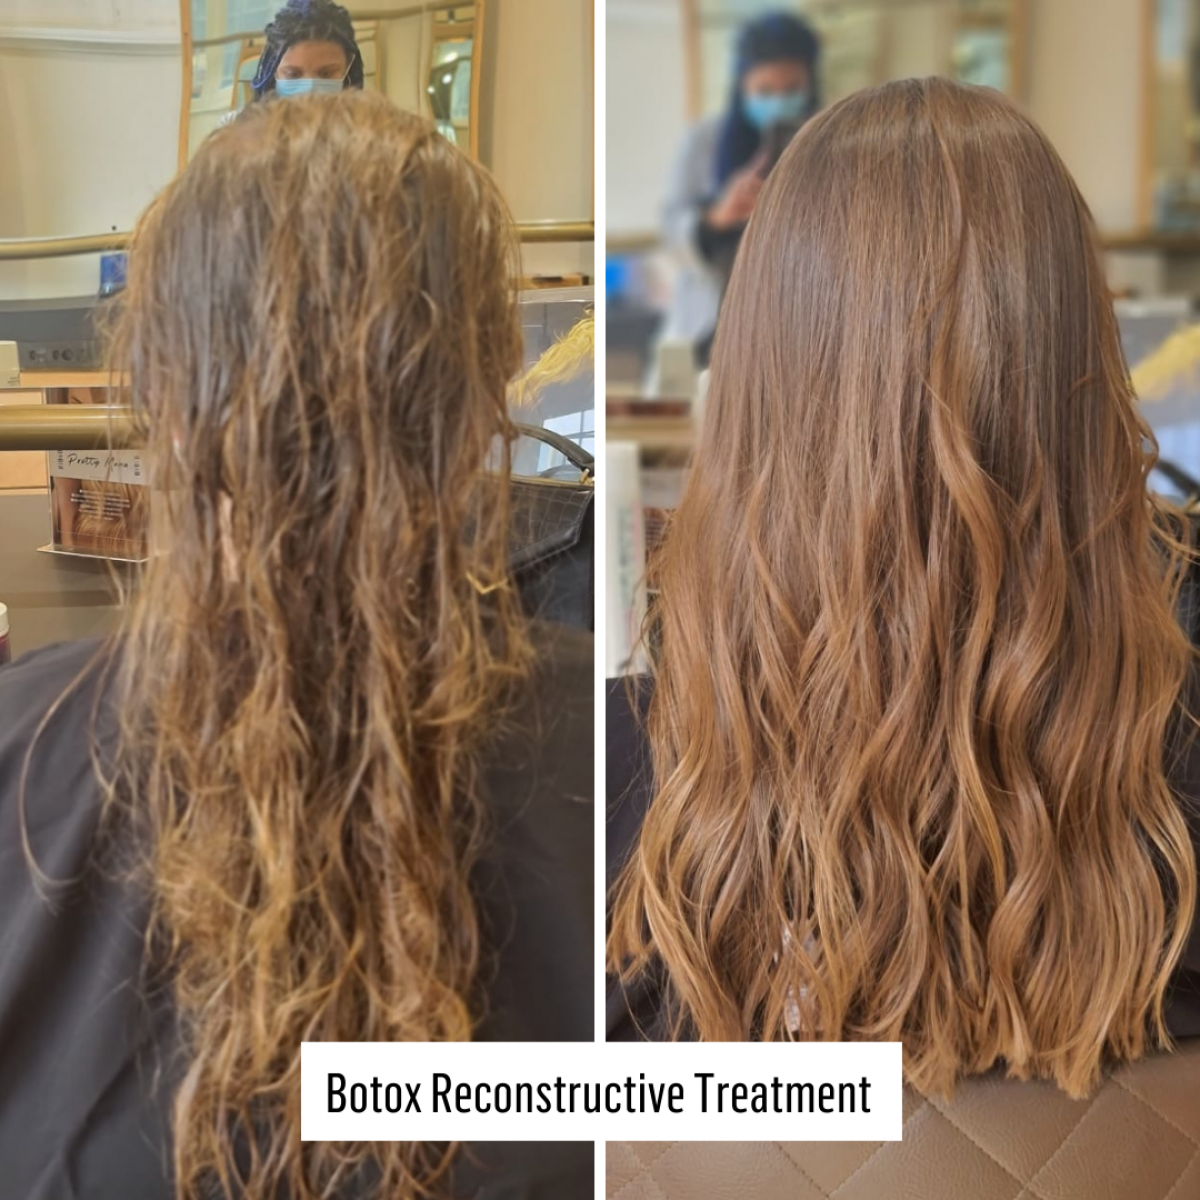 Have you tried the HairBotox Reconstructive Treatment?